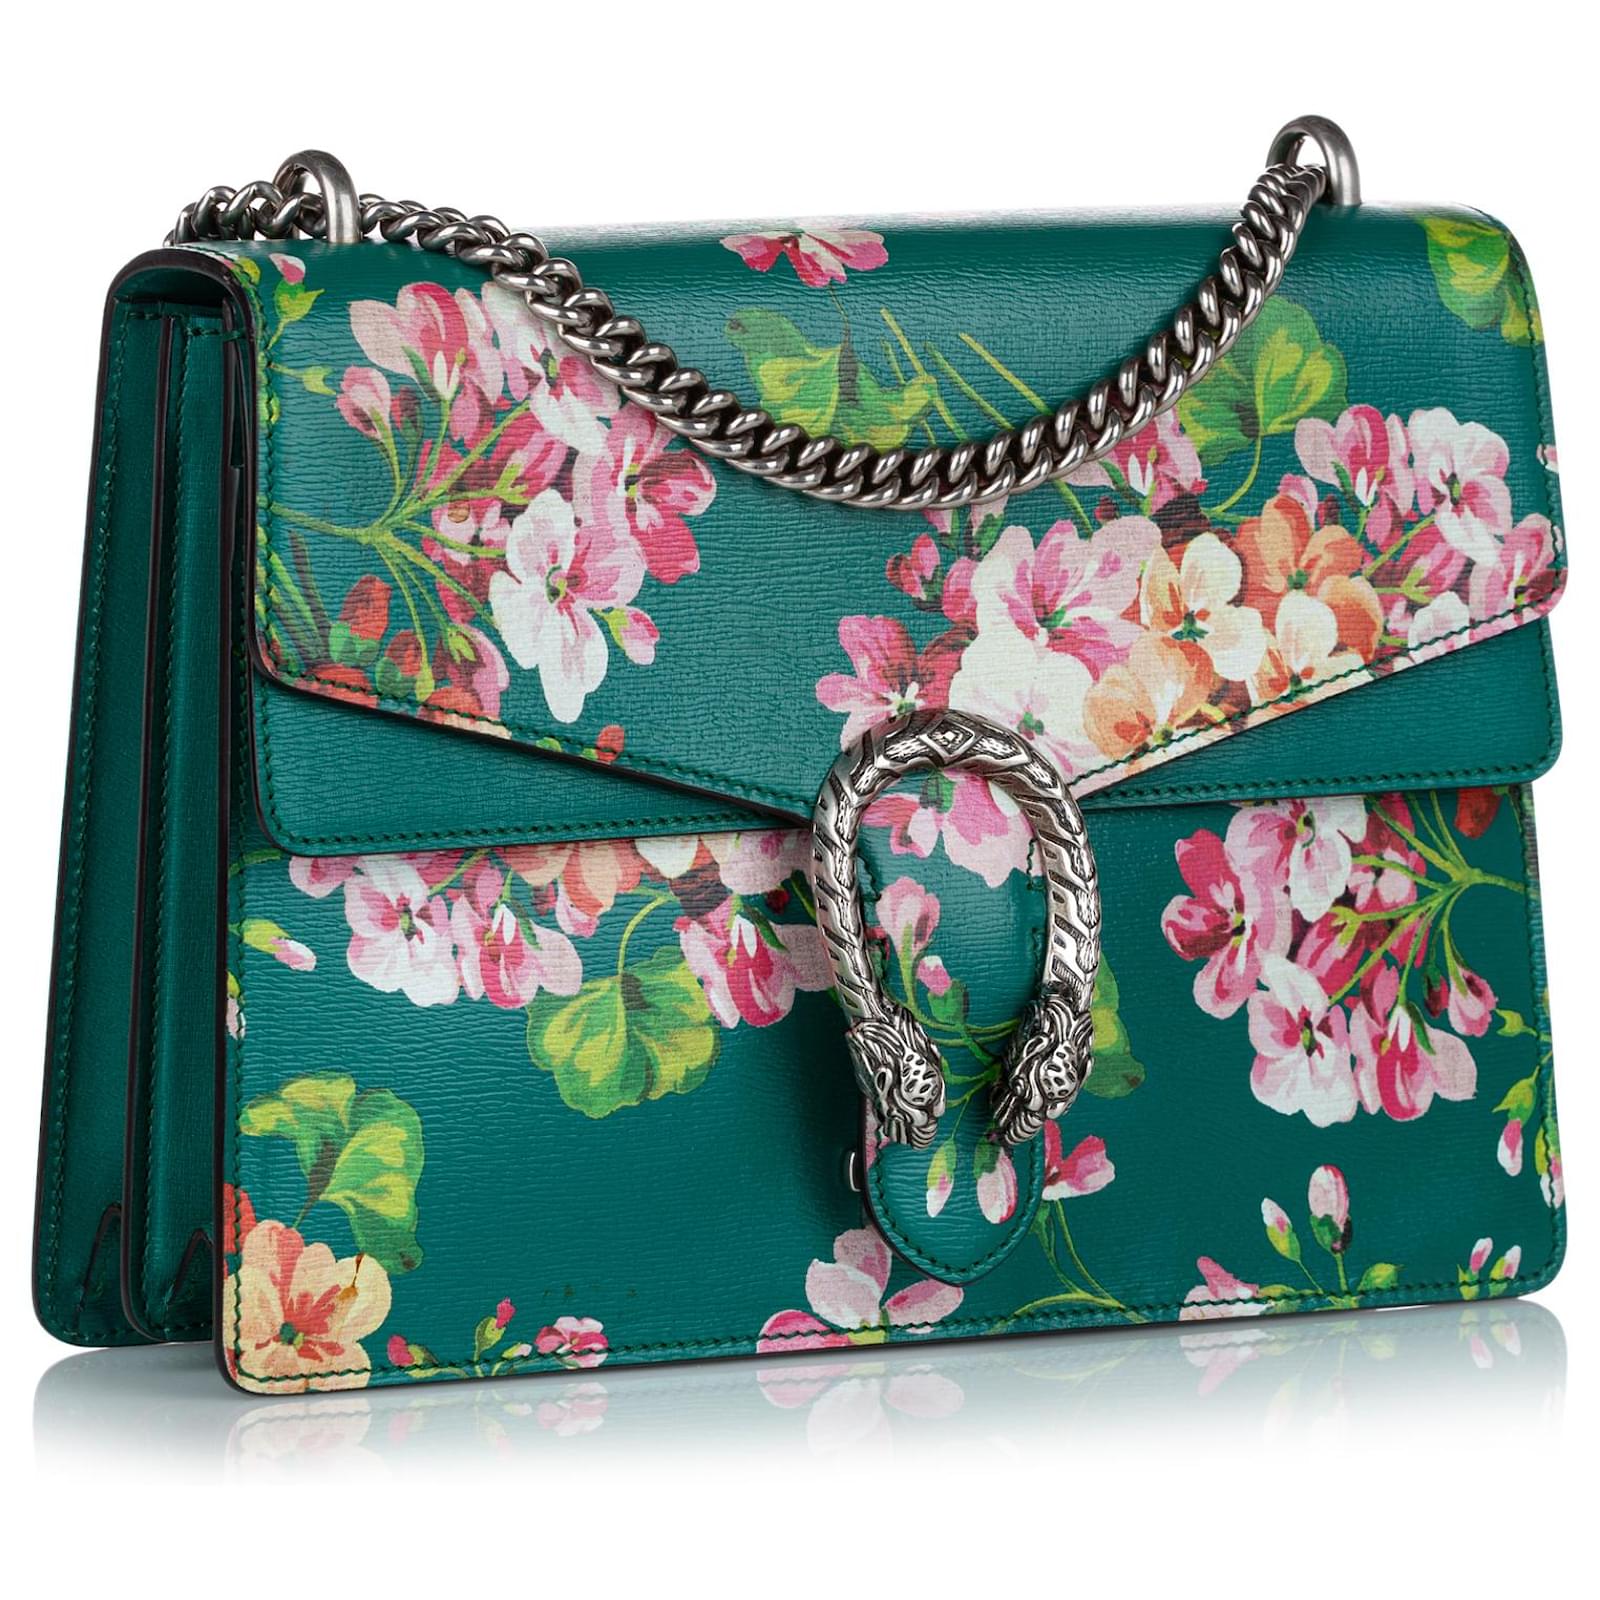 Gucci Small Dionysus Blooms Leather Shoulder Bag in Green –